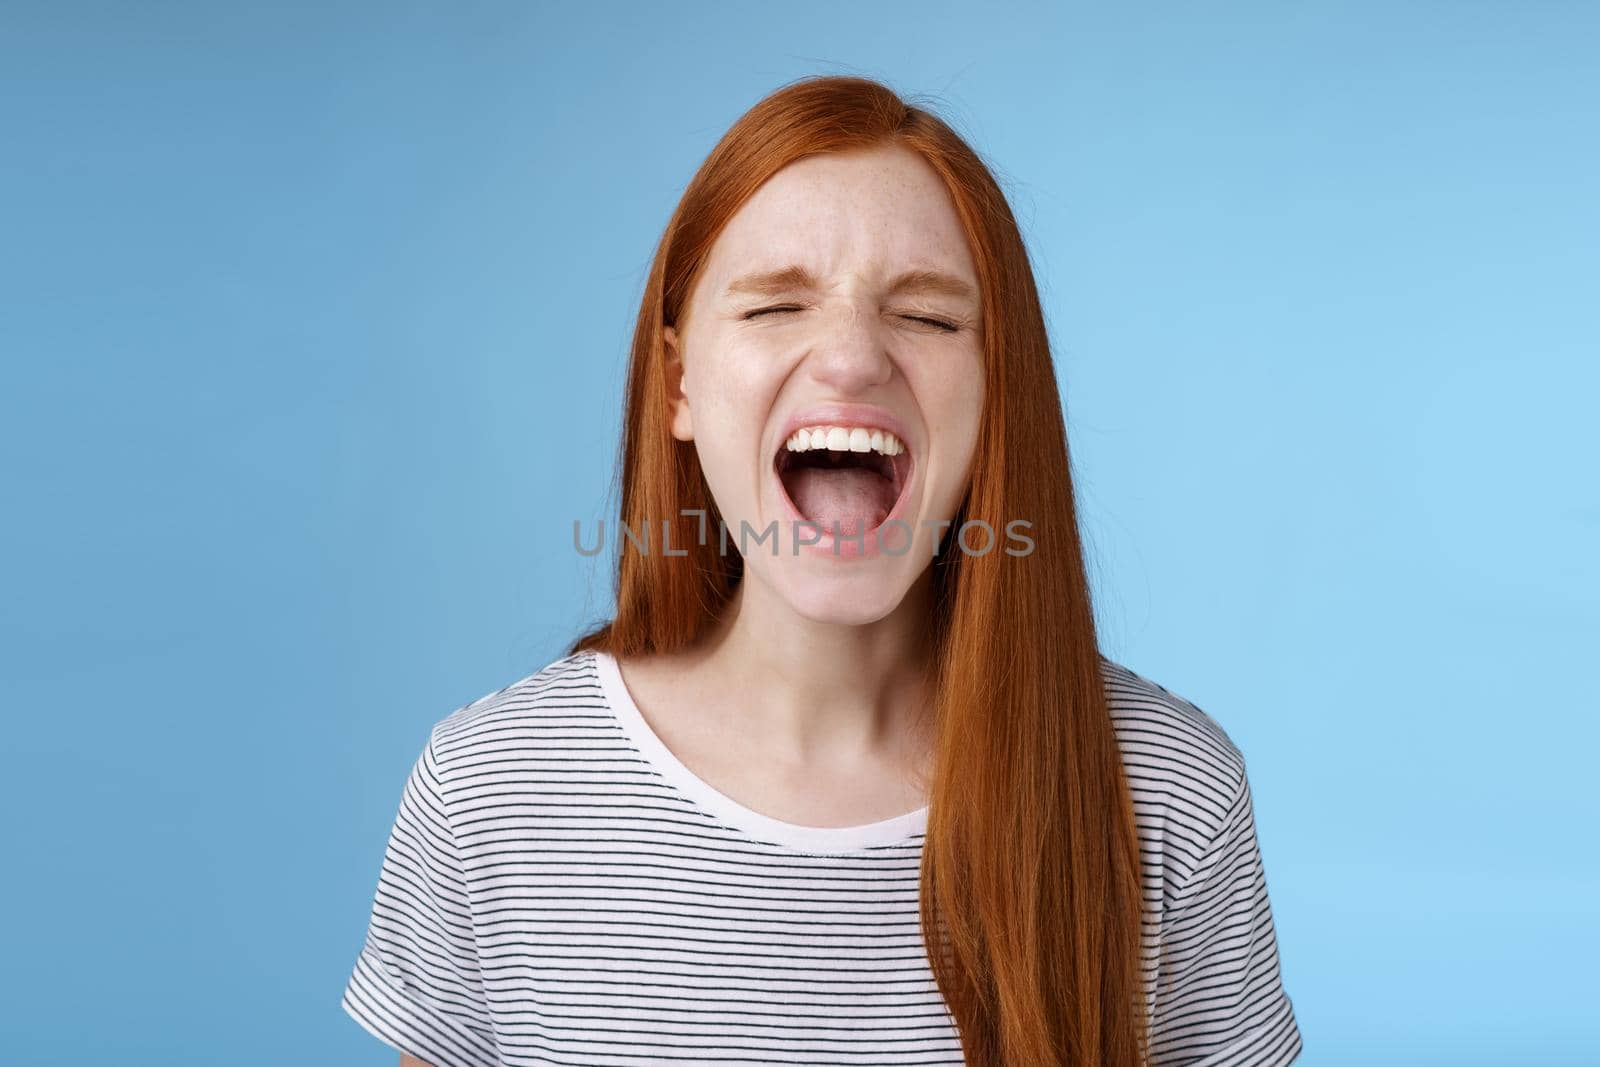 Girl screaming out loud showing attitude take out stress being fed up complaining hursh life shouting closed eyes yelling pissed standing bothered distressed blue background. Copy space